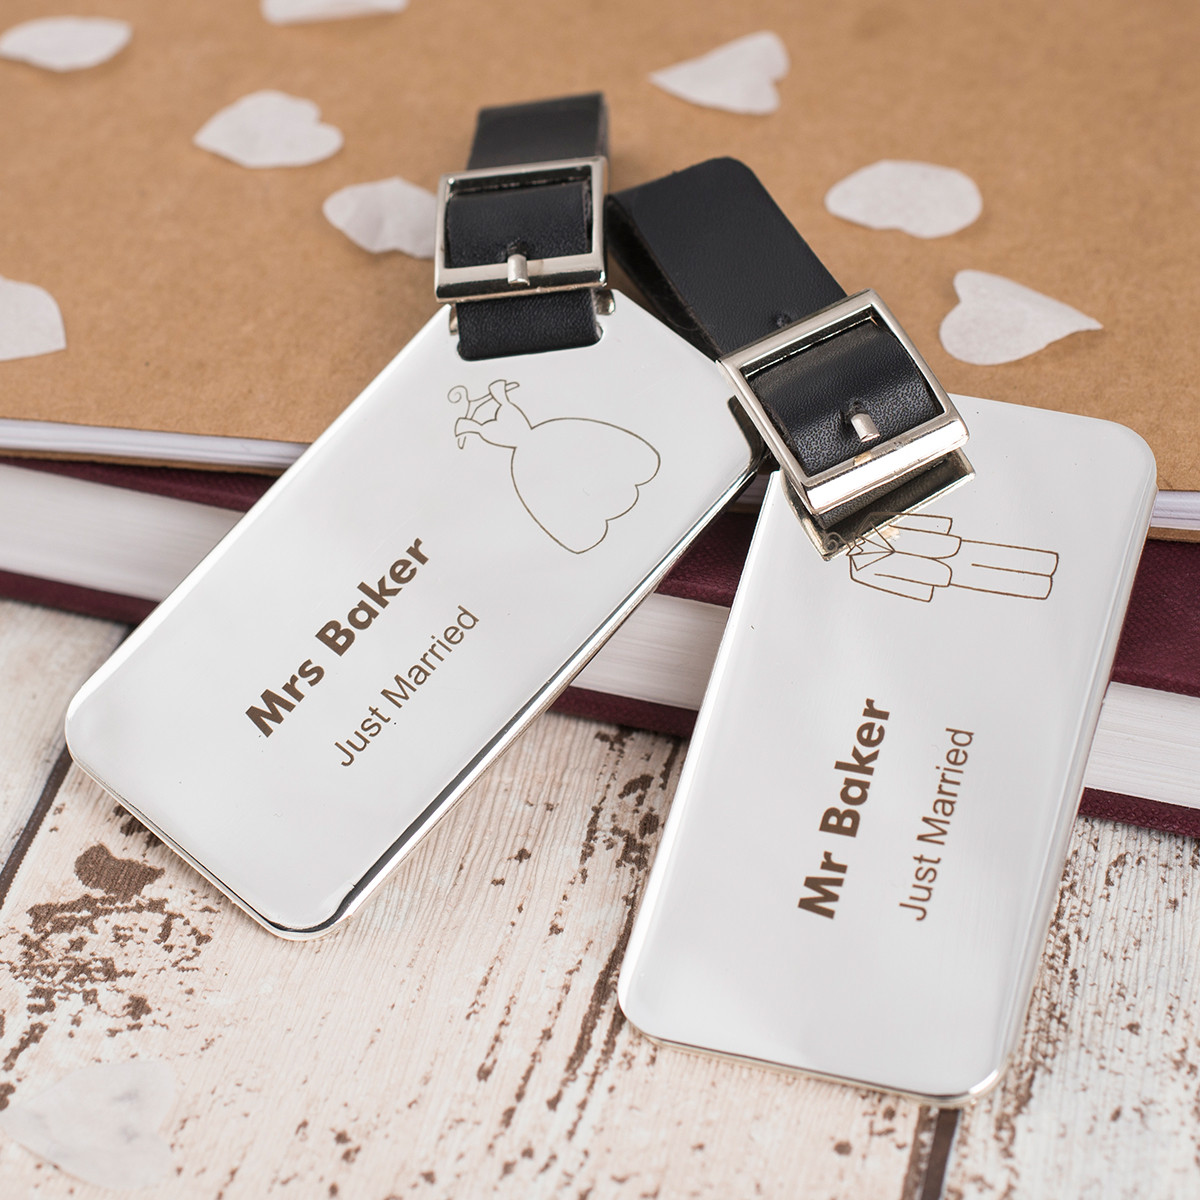 Honeymoon Gift Ideas Couples
 Wedding Gift Ideas For Couples Who Have Everything